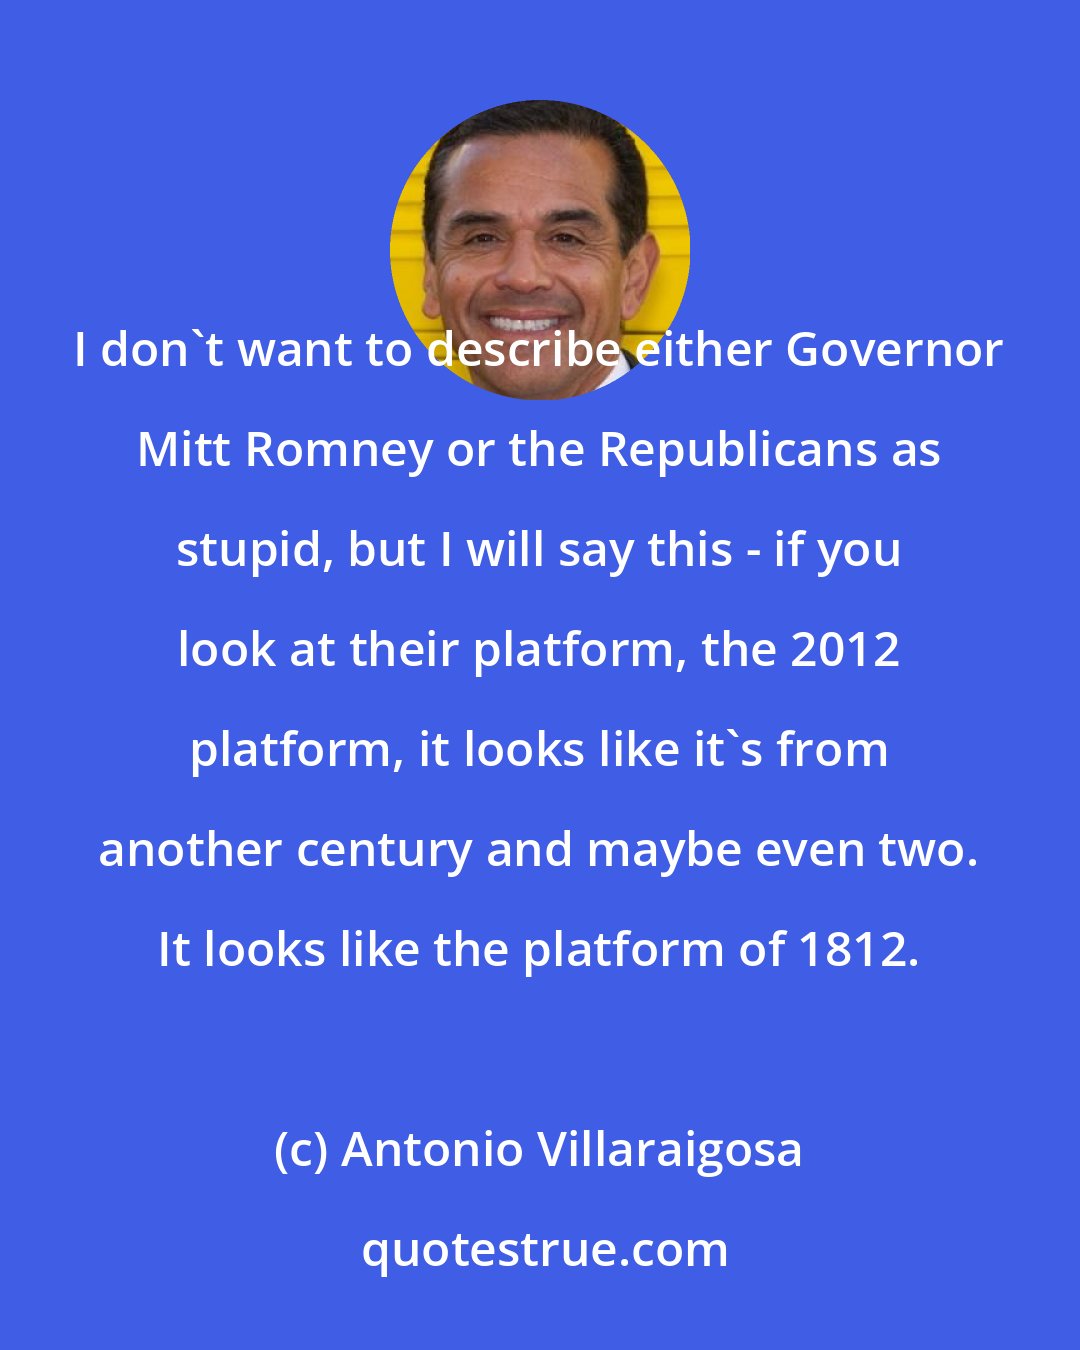 Antonio Villaraigosa: I don't want to describe either Governor Mitt Romney or the Republicans as stupid, but I will say this - if you look at their platform, the 2012 platform, it looks like it's from another century and maybe even two. It looks like the platform of 1812.